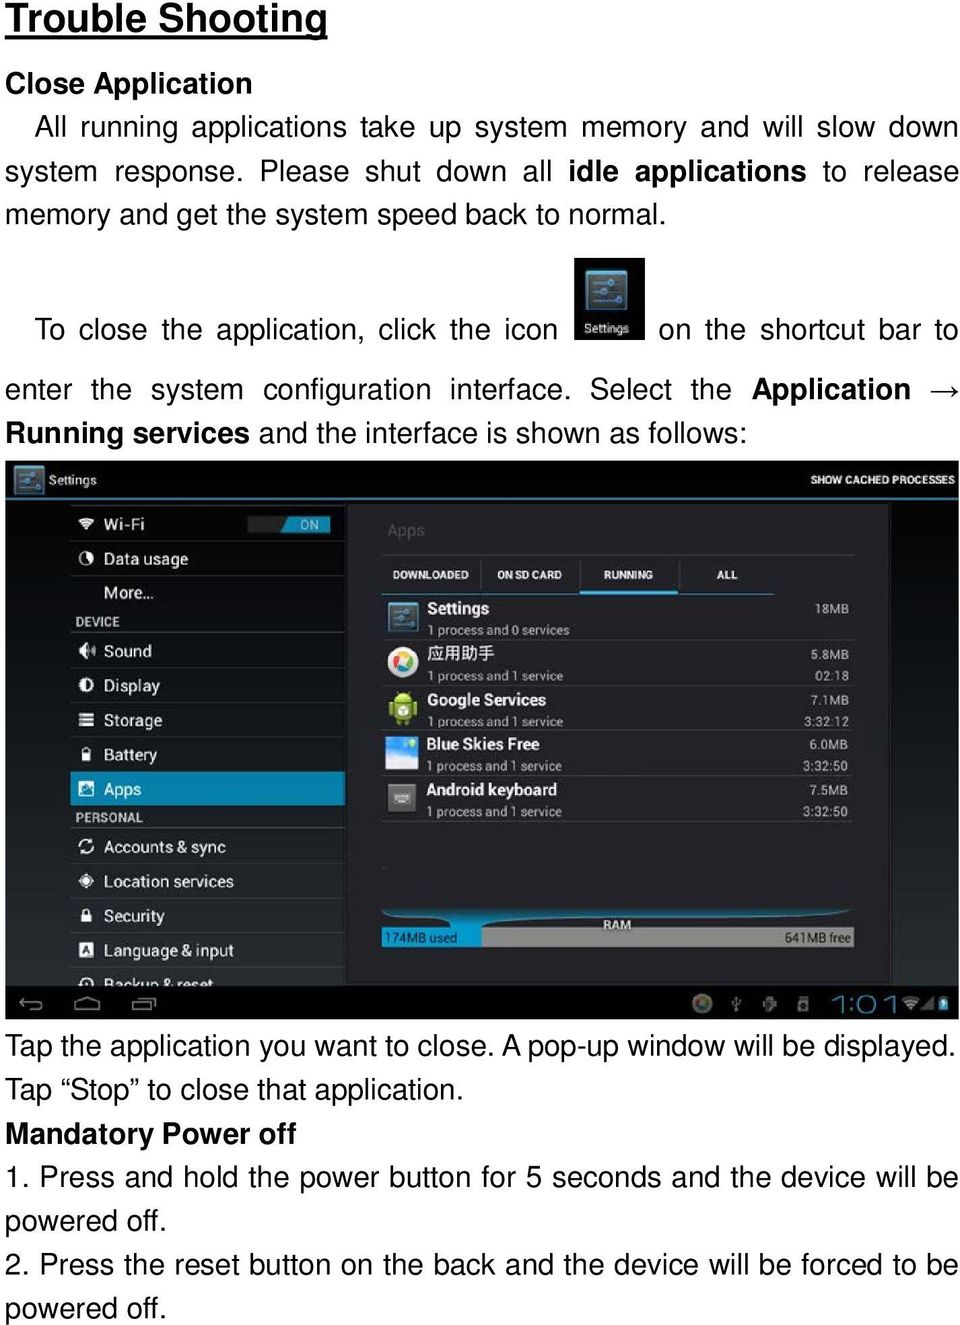 To close the application, click the icon on the shortcut bar to enter the system configuration interface.